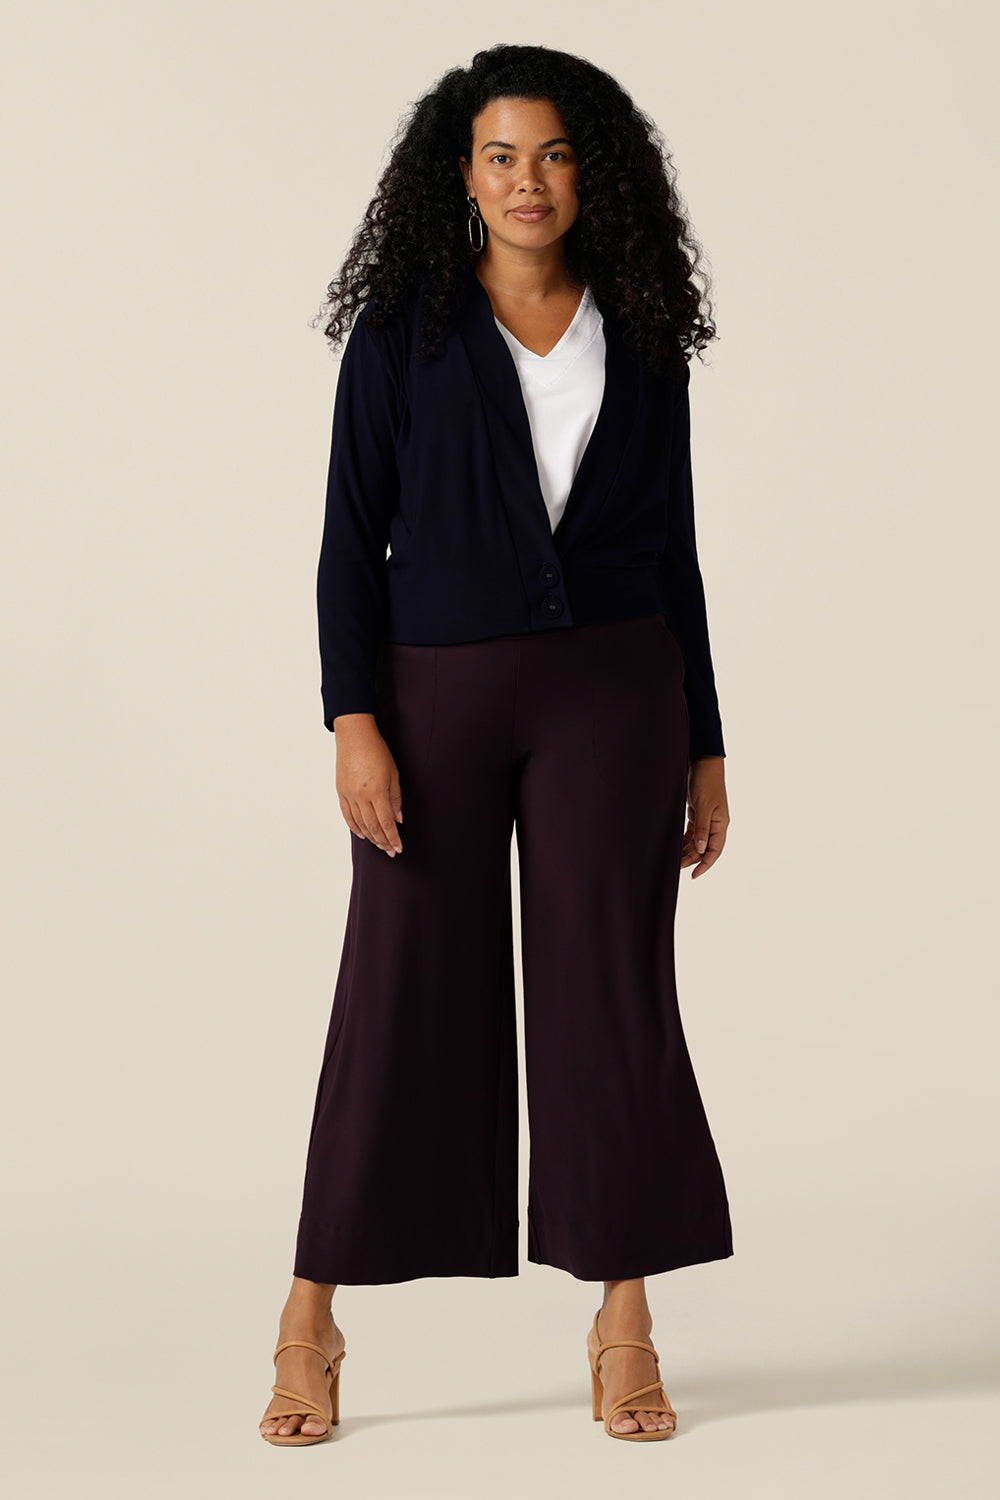 size 12 curvy woman wears a V-neck jersey cardigan in navy blue with long sleeves. Great for Australian and New Zealand woman looking a jacket for autumn/winter, this jacket-cardigan hybrid works for corporate and casual wear.